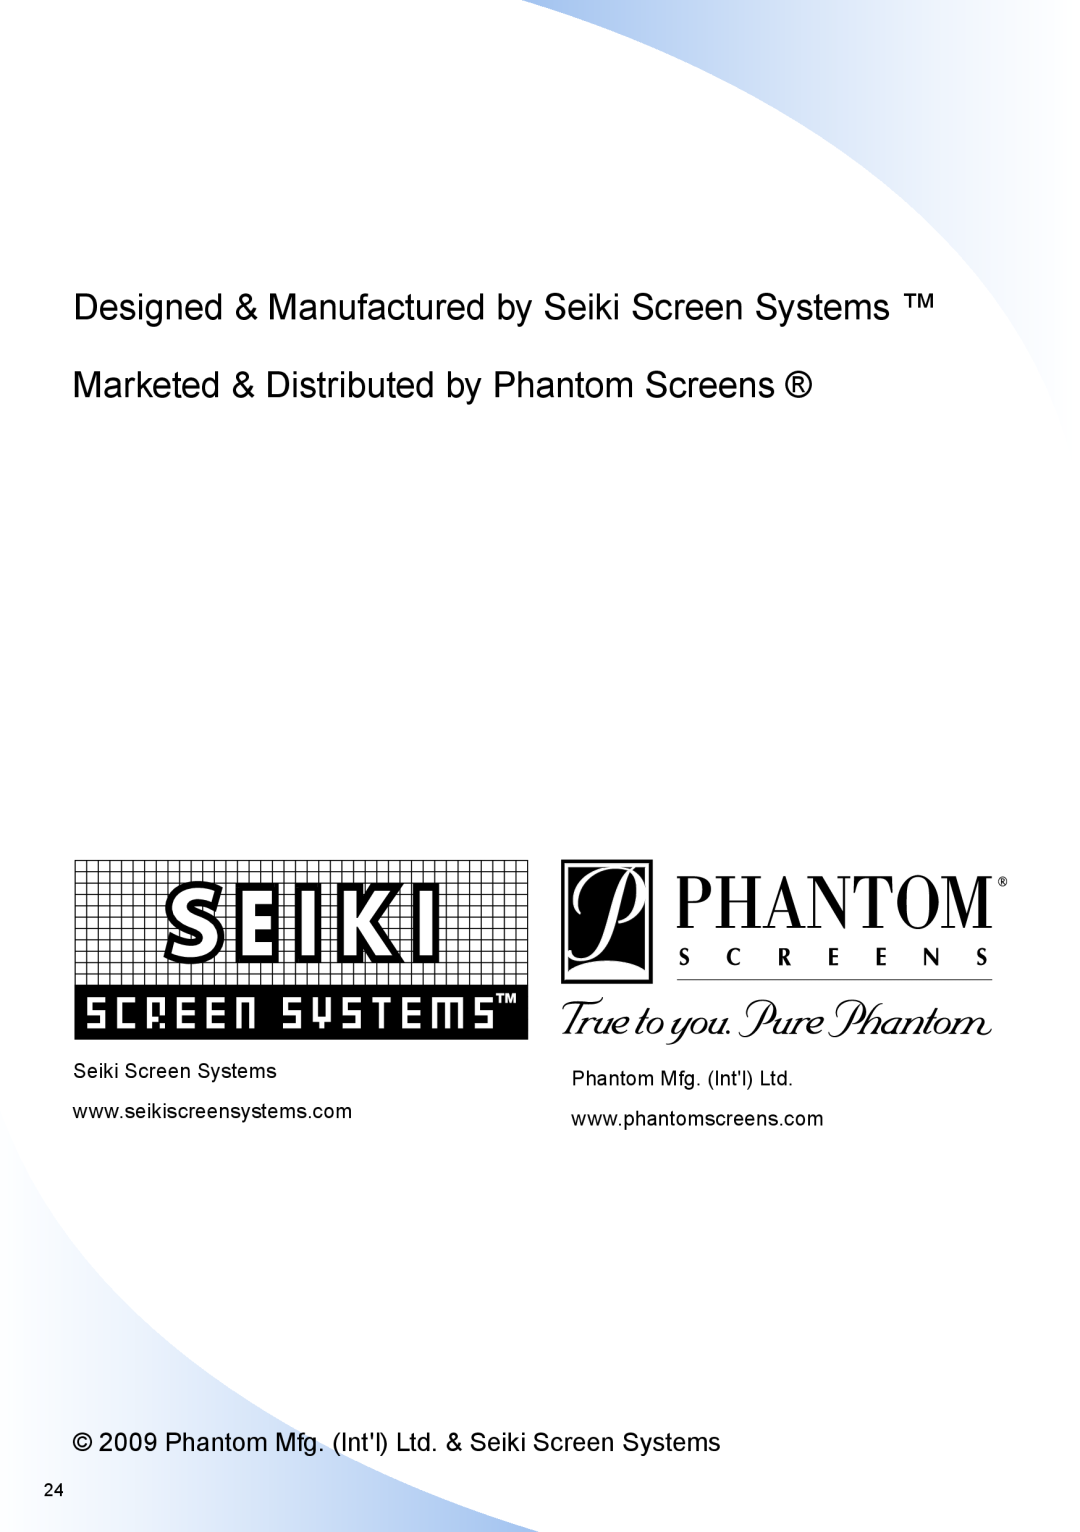 Phantom Tech QC03-0903R Designed & Manufactured by Seiki Screen Systems, Marketed & Distributed by Phantom Screens 